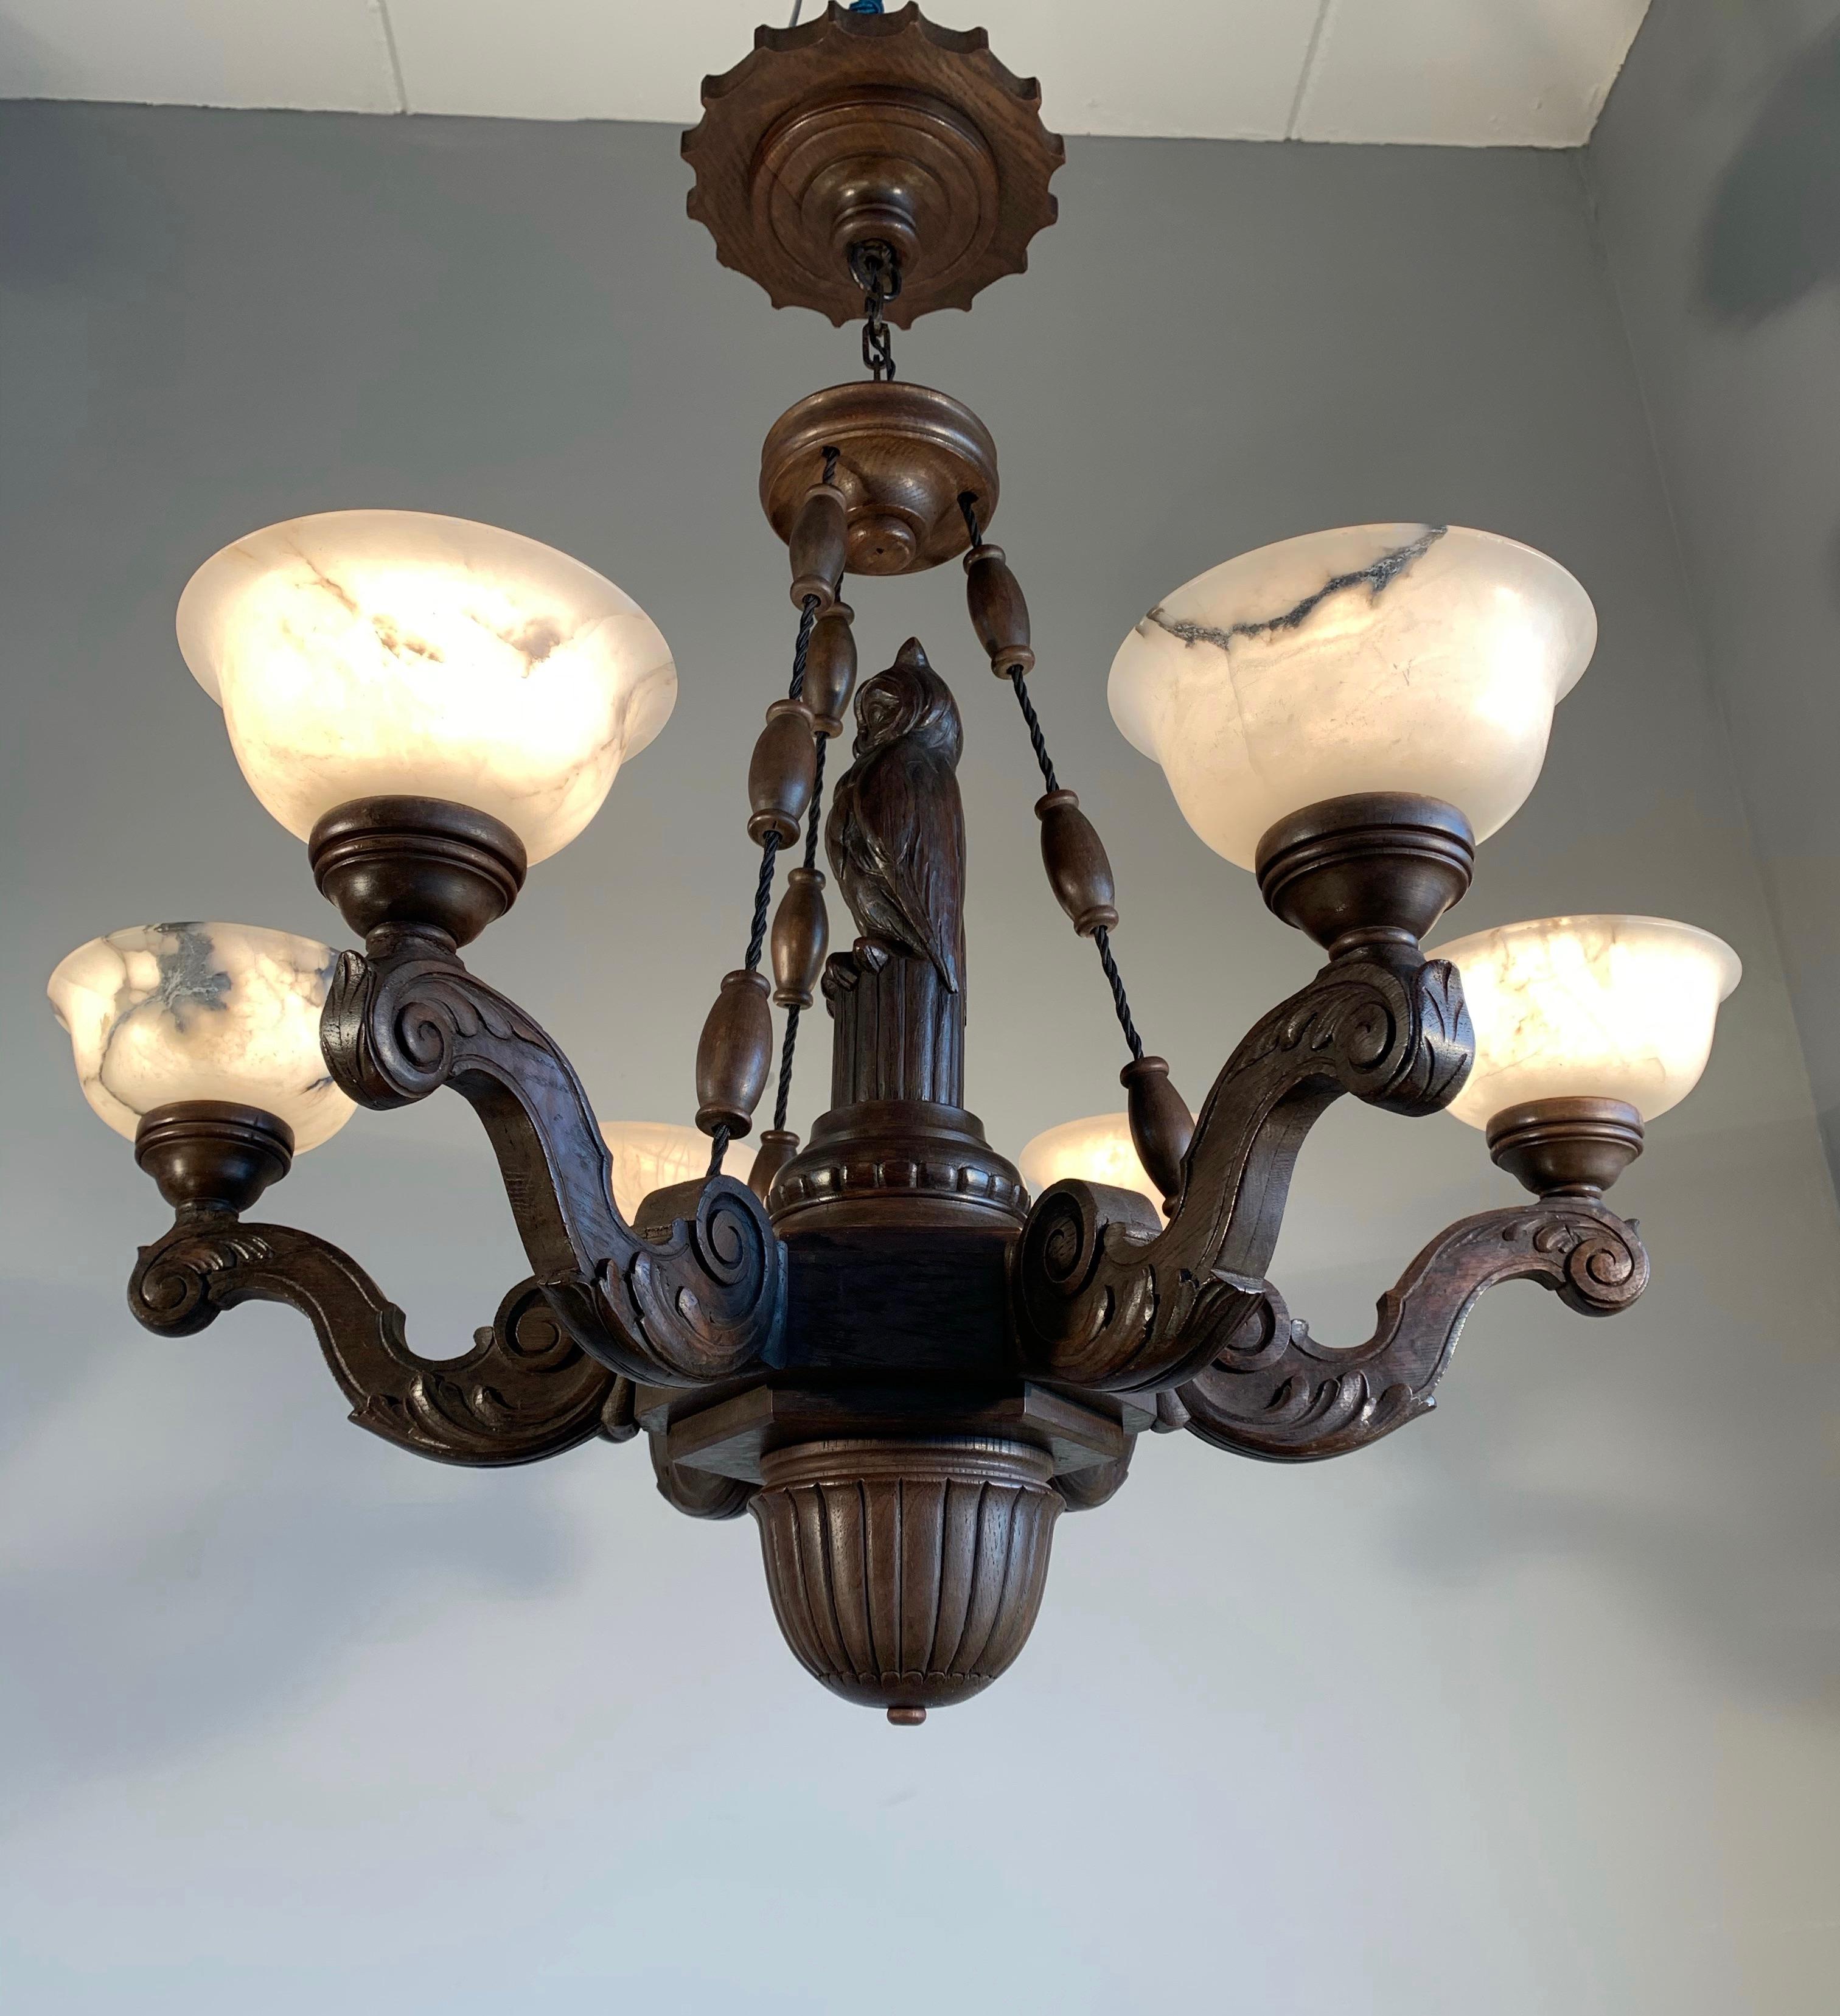 Amazing Arts & Crafts 6-Light Chandelier with Owl Sculpture and Alabaster Shades 13